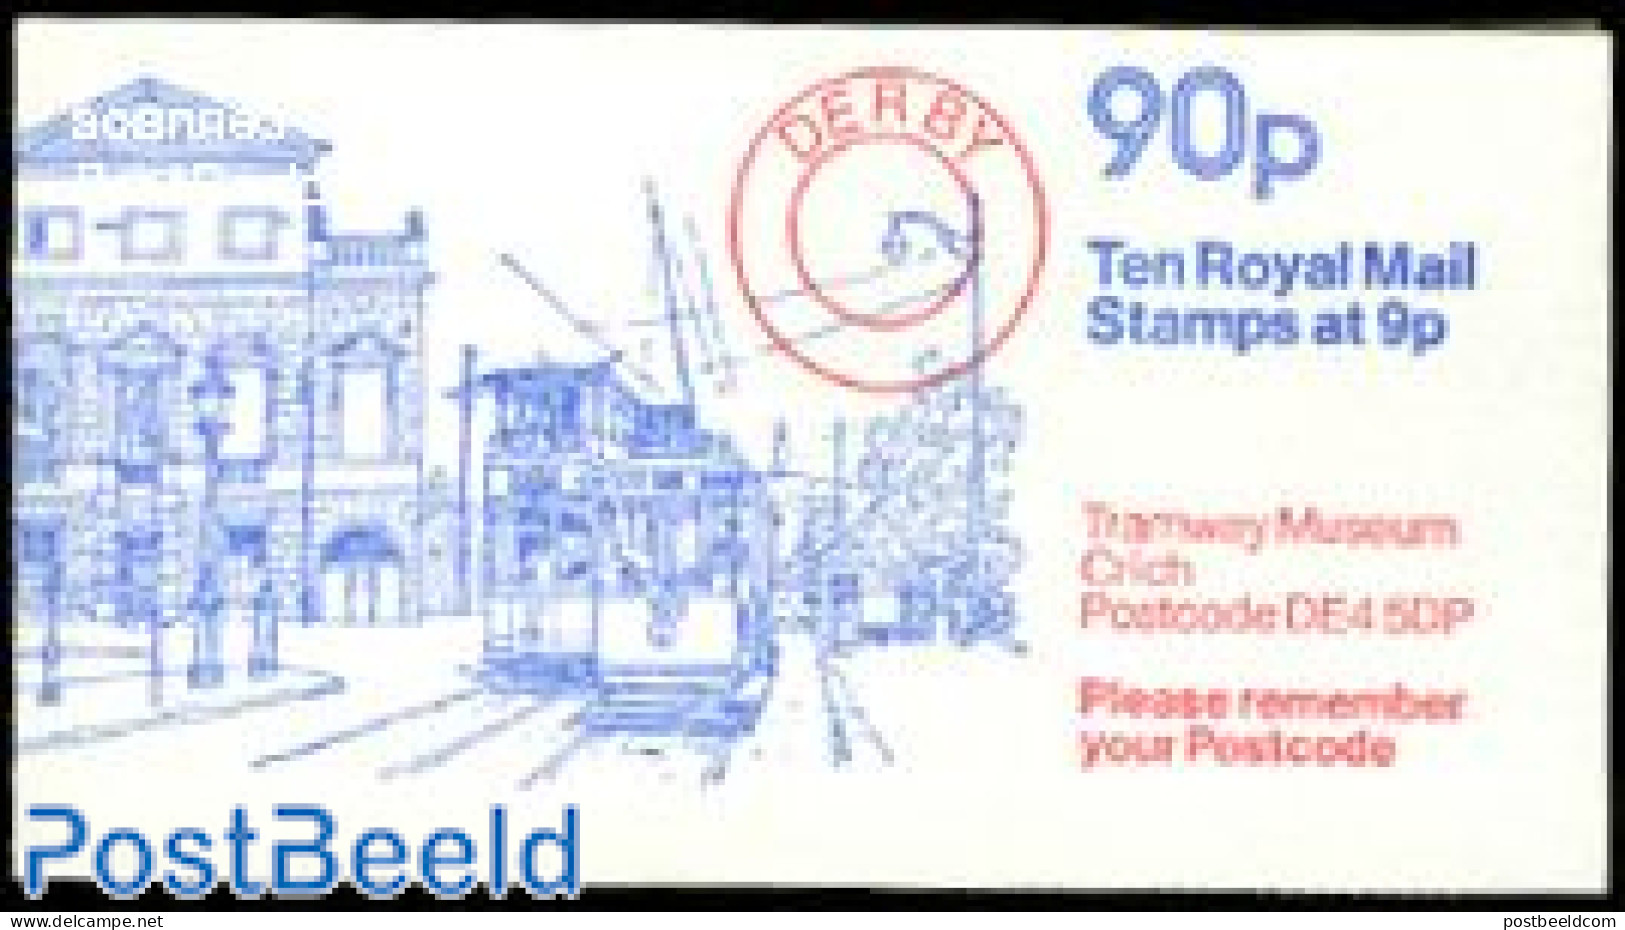 Great Britain 1979 Definitives Booklet, Tramway Museum, Selvedge Righ, Mint NH, Transport - Stamp Booklets - Railways .. - Neufs